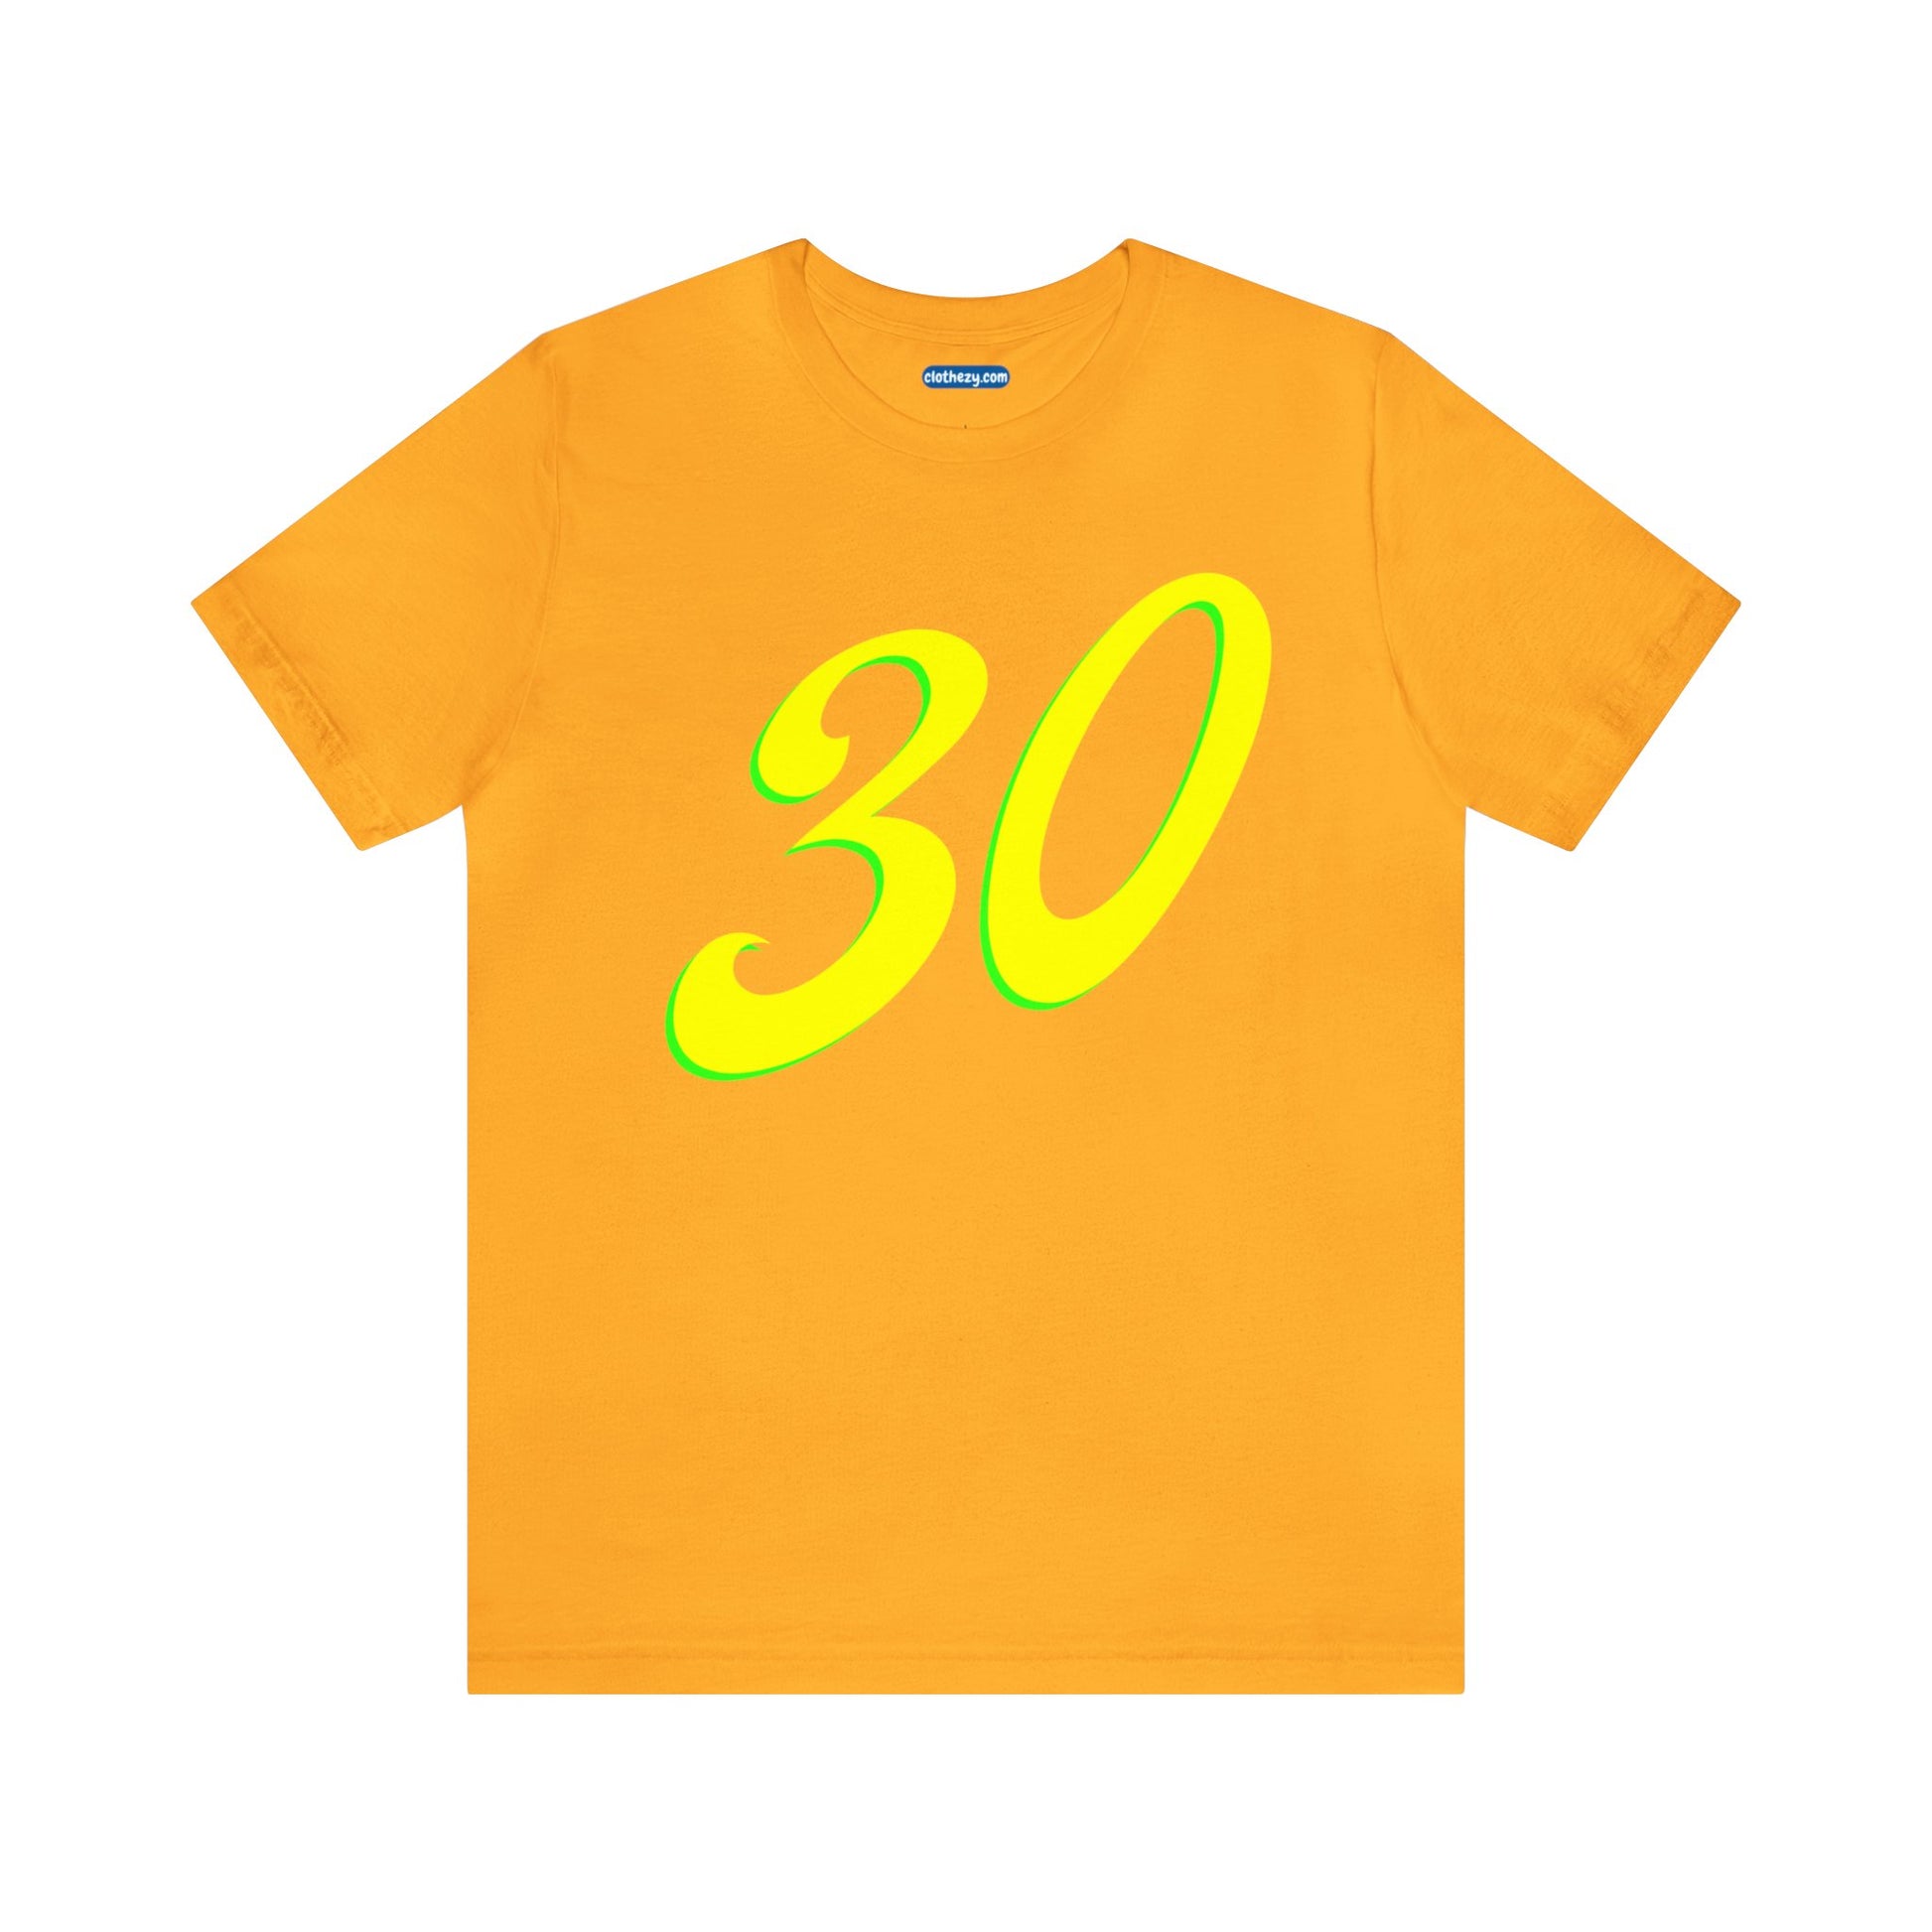 Number 30 Design - Soft Cotton Tee for birthdays and celebrations, Gift for friends and family, Multiple Options by clothezy.com in Gold Size Small - Buy Now